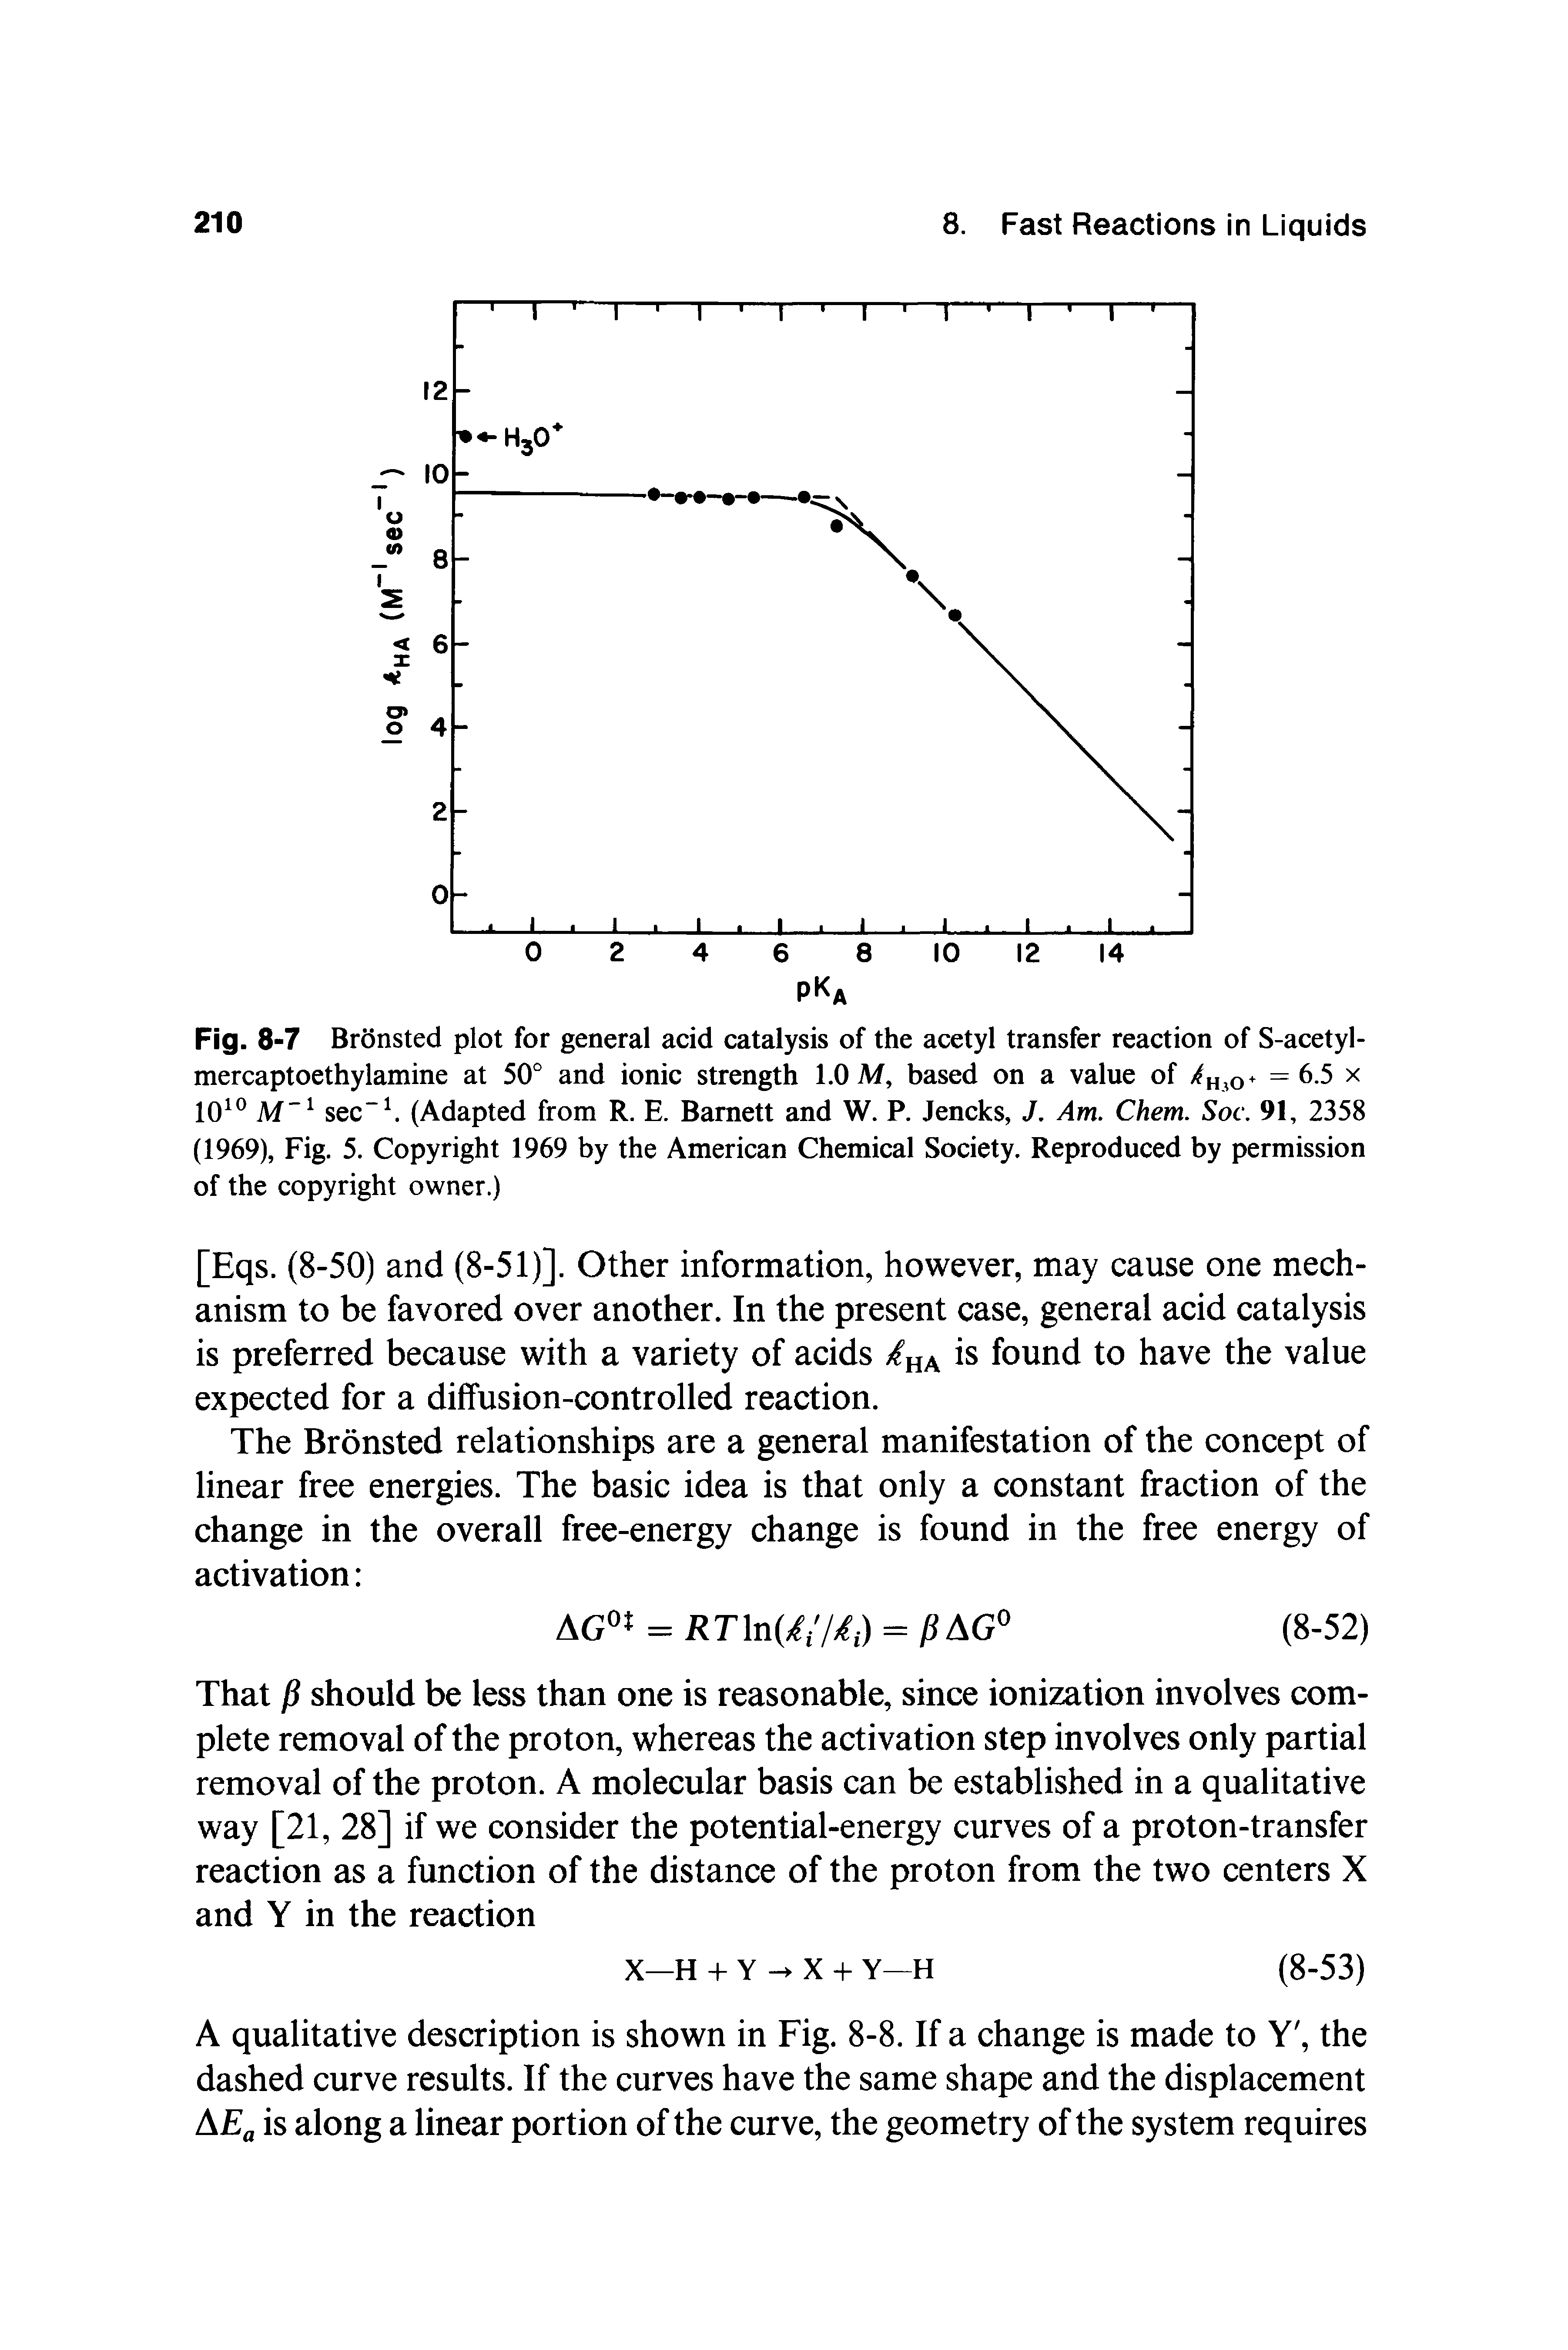 Fig. 8-7 Bronsted plot for general acid catalysis of the acetyl transfer reaction of S-acetyl-mercaptoethylamine at 50"" and ionic strength 1.0 M, based on a value of =6.5 x 10 M" sec L (Adapted from R. E. Barnett and W. P. Jencks, J, Am. Chem. Soc. 91, 2358 (1969), Fig. 5. Copyright 1969 by the American Chemical Society. Reproduced by permission of the copyright owner.)...